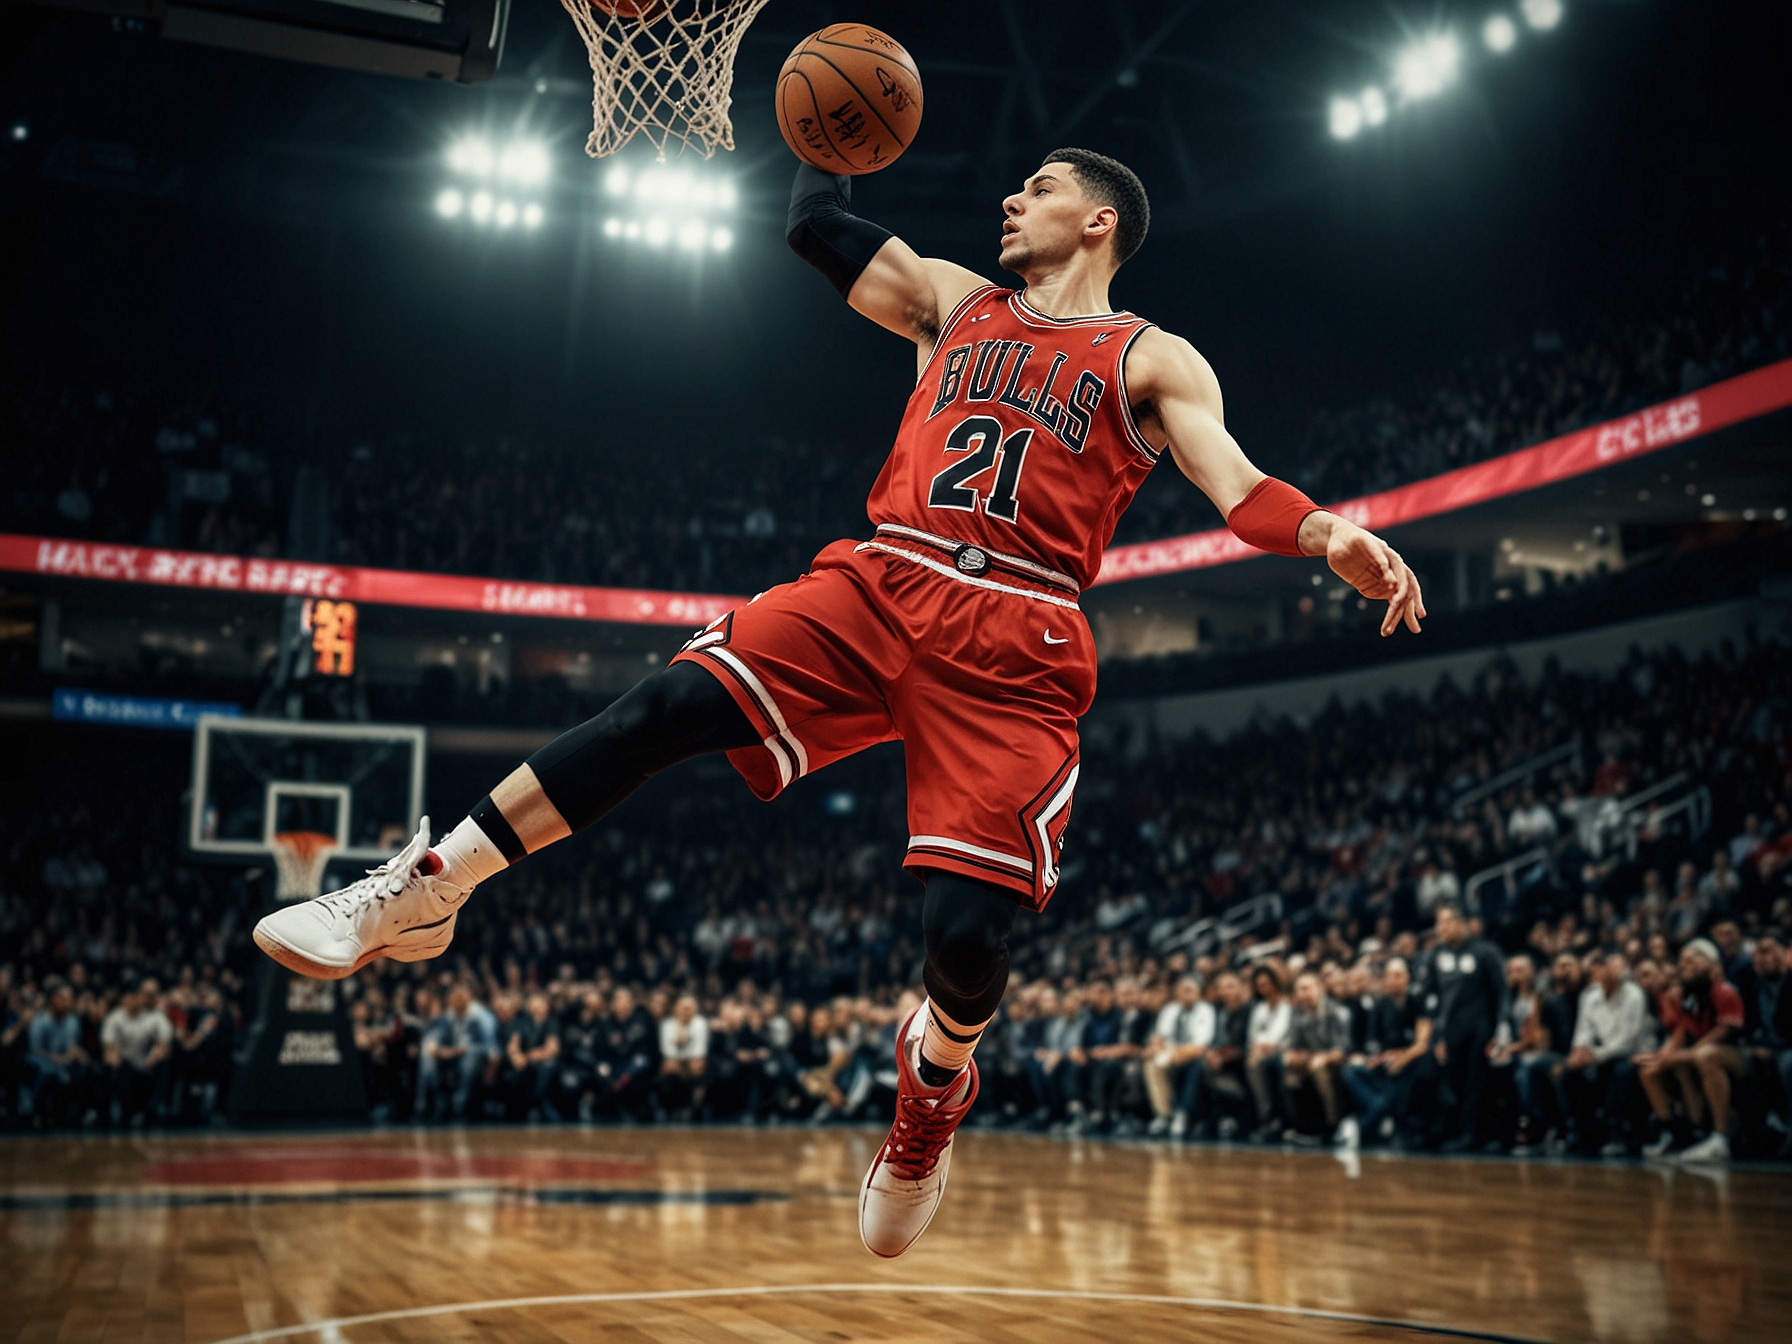 Zach LaVine in Chicago Bulls uniform, executing a high-flying dunk during a game, symbolizing his scoring prowess and central role in the team's recent history.